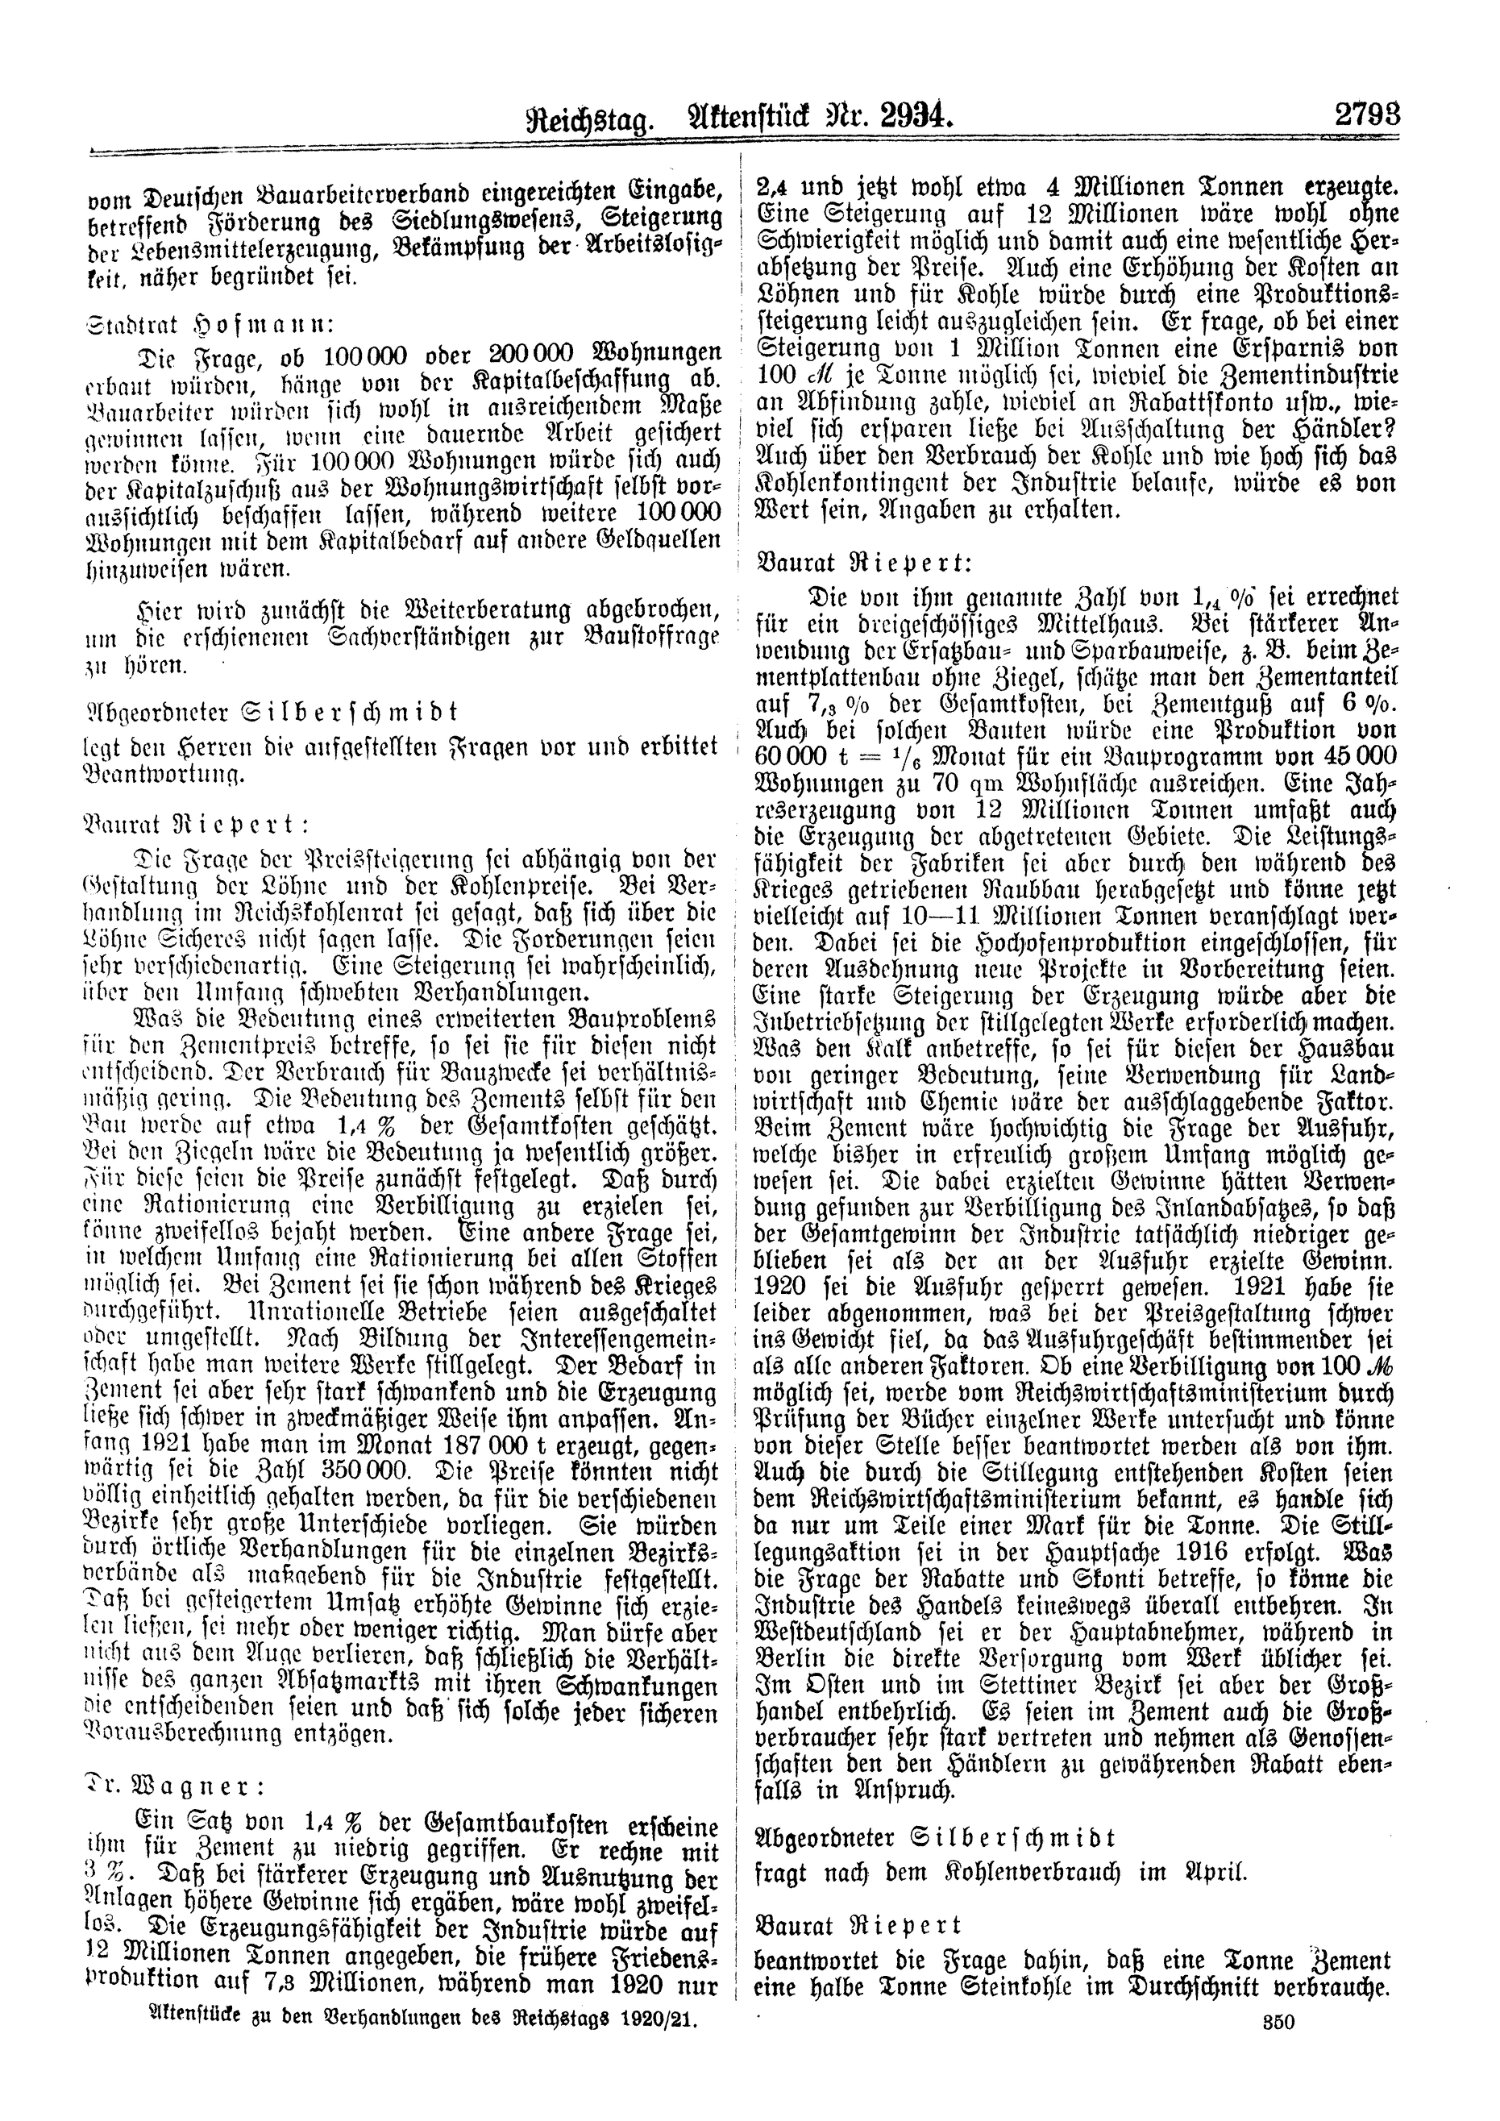 Scan of page 2793